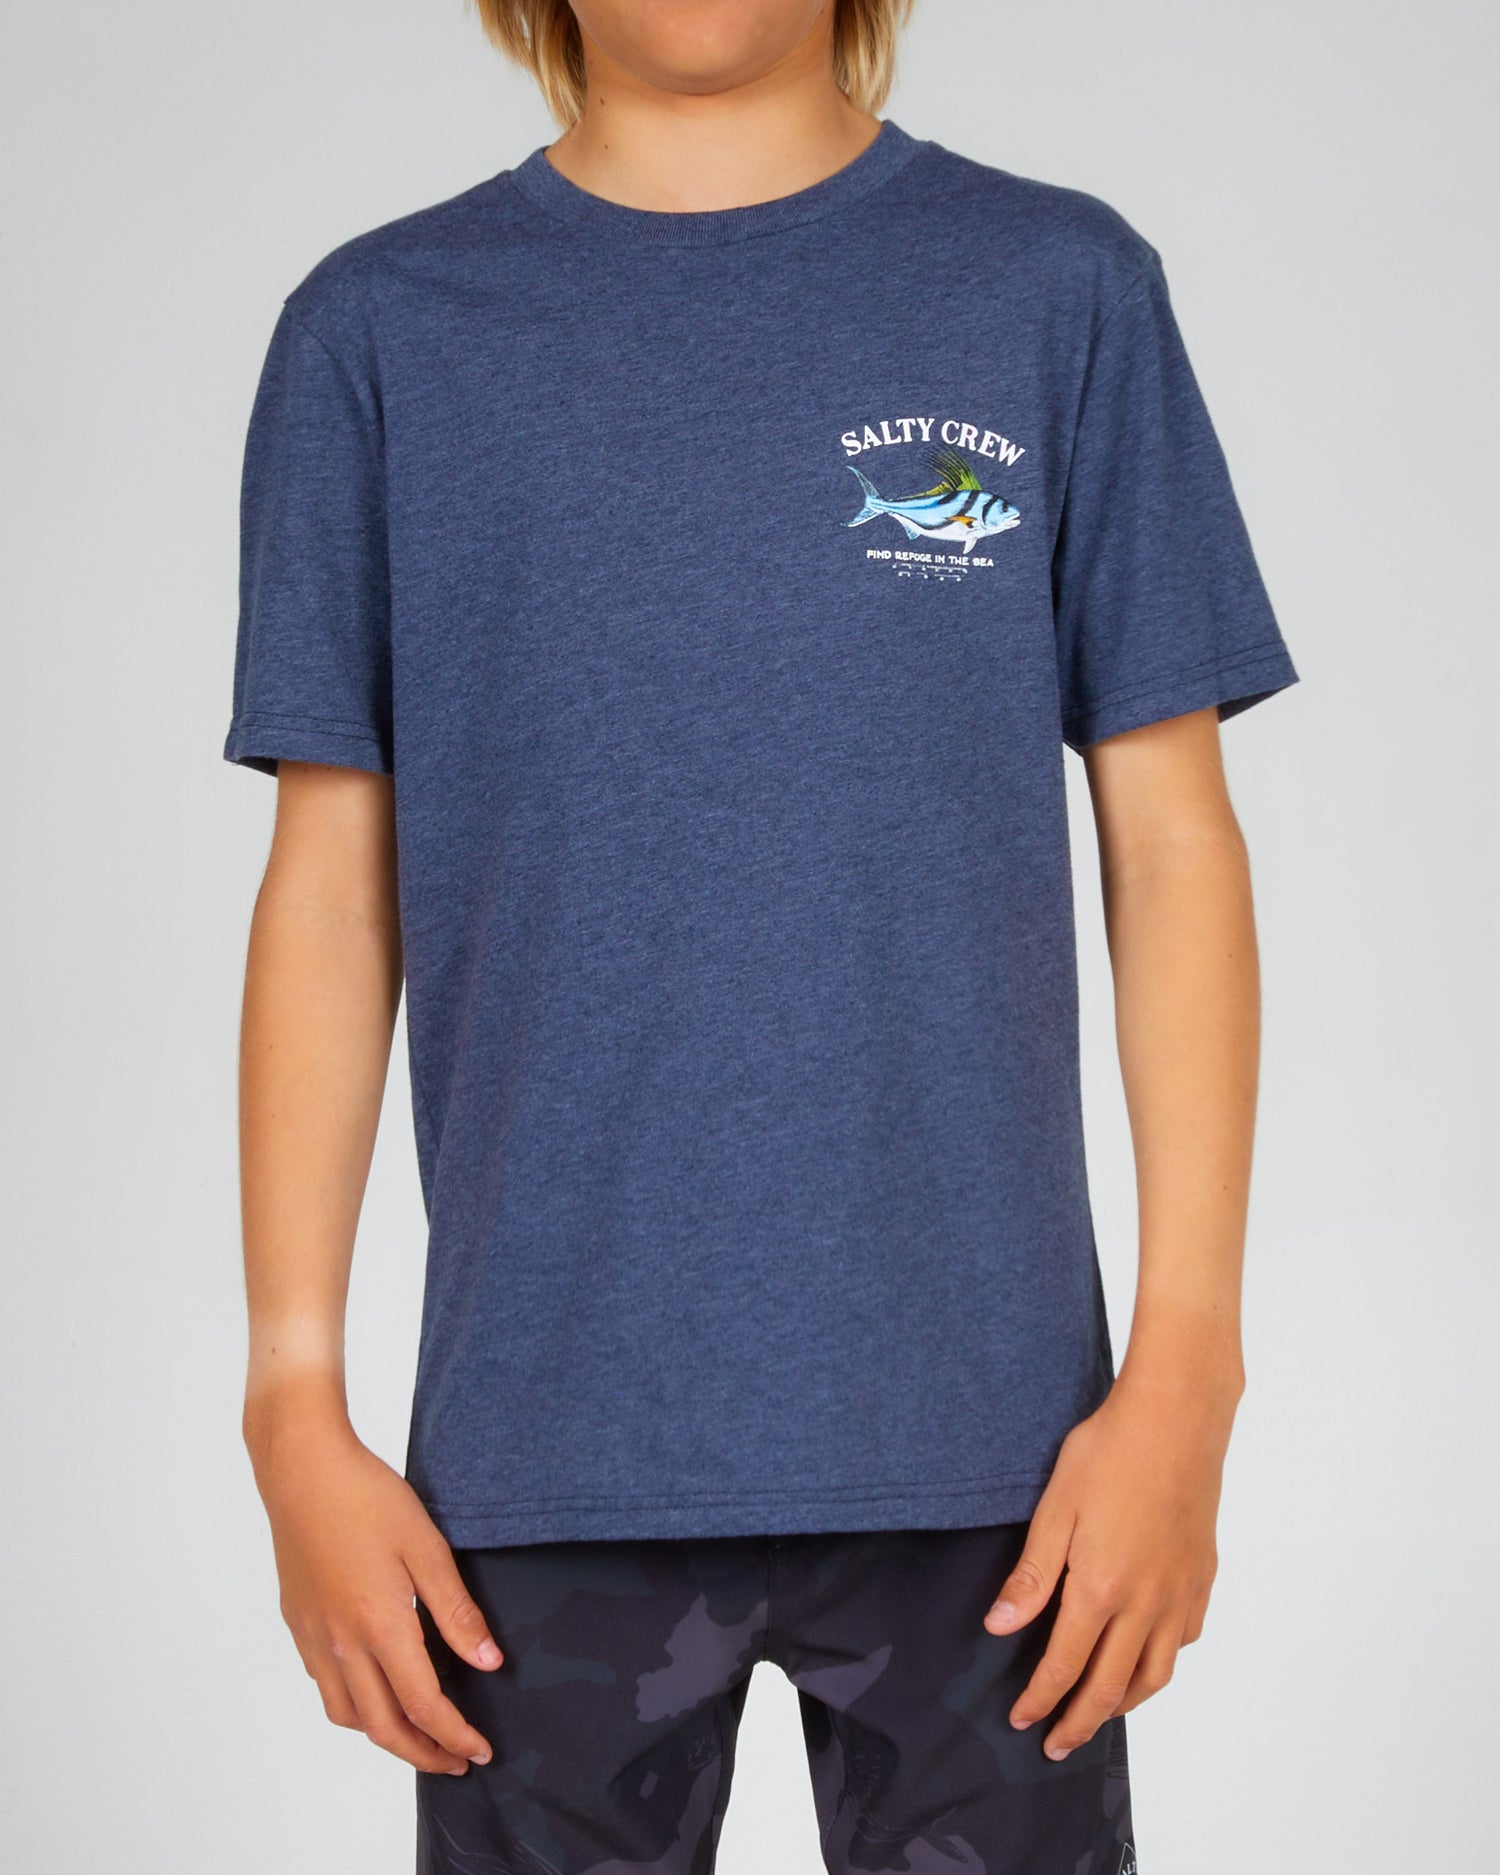 ROOSTER BOYS S/S TEE - Navy Heather